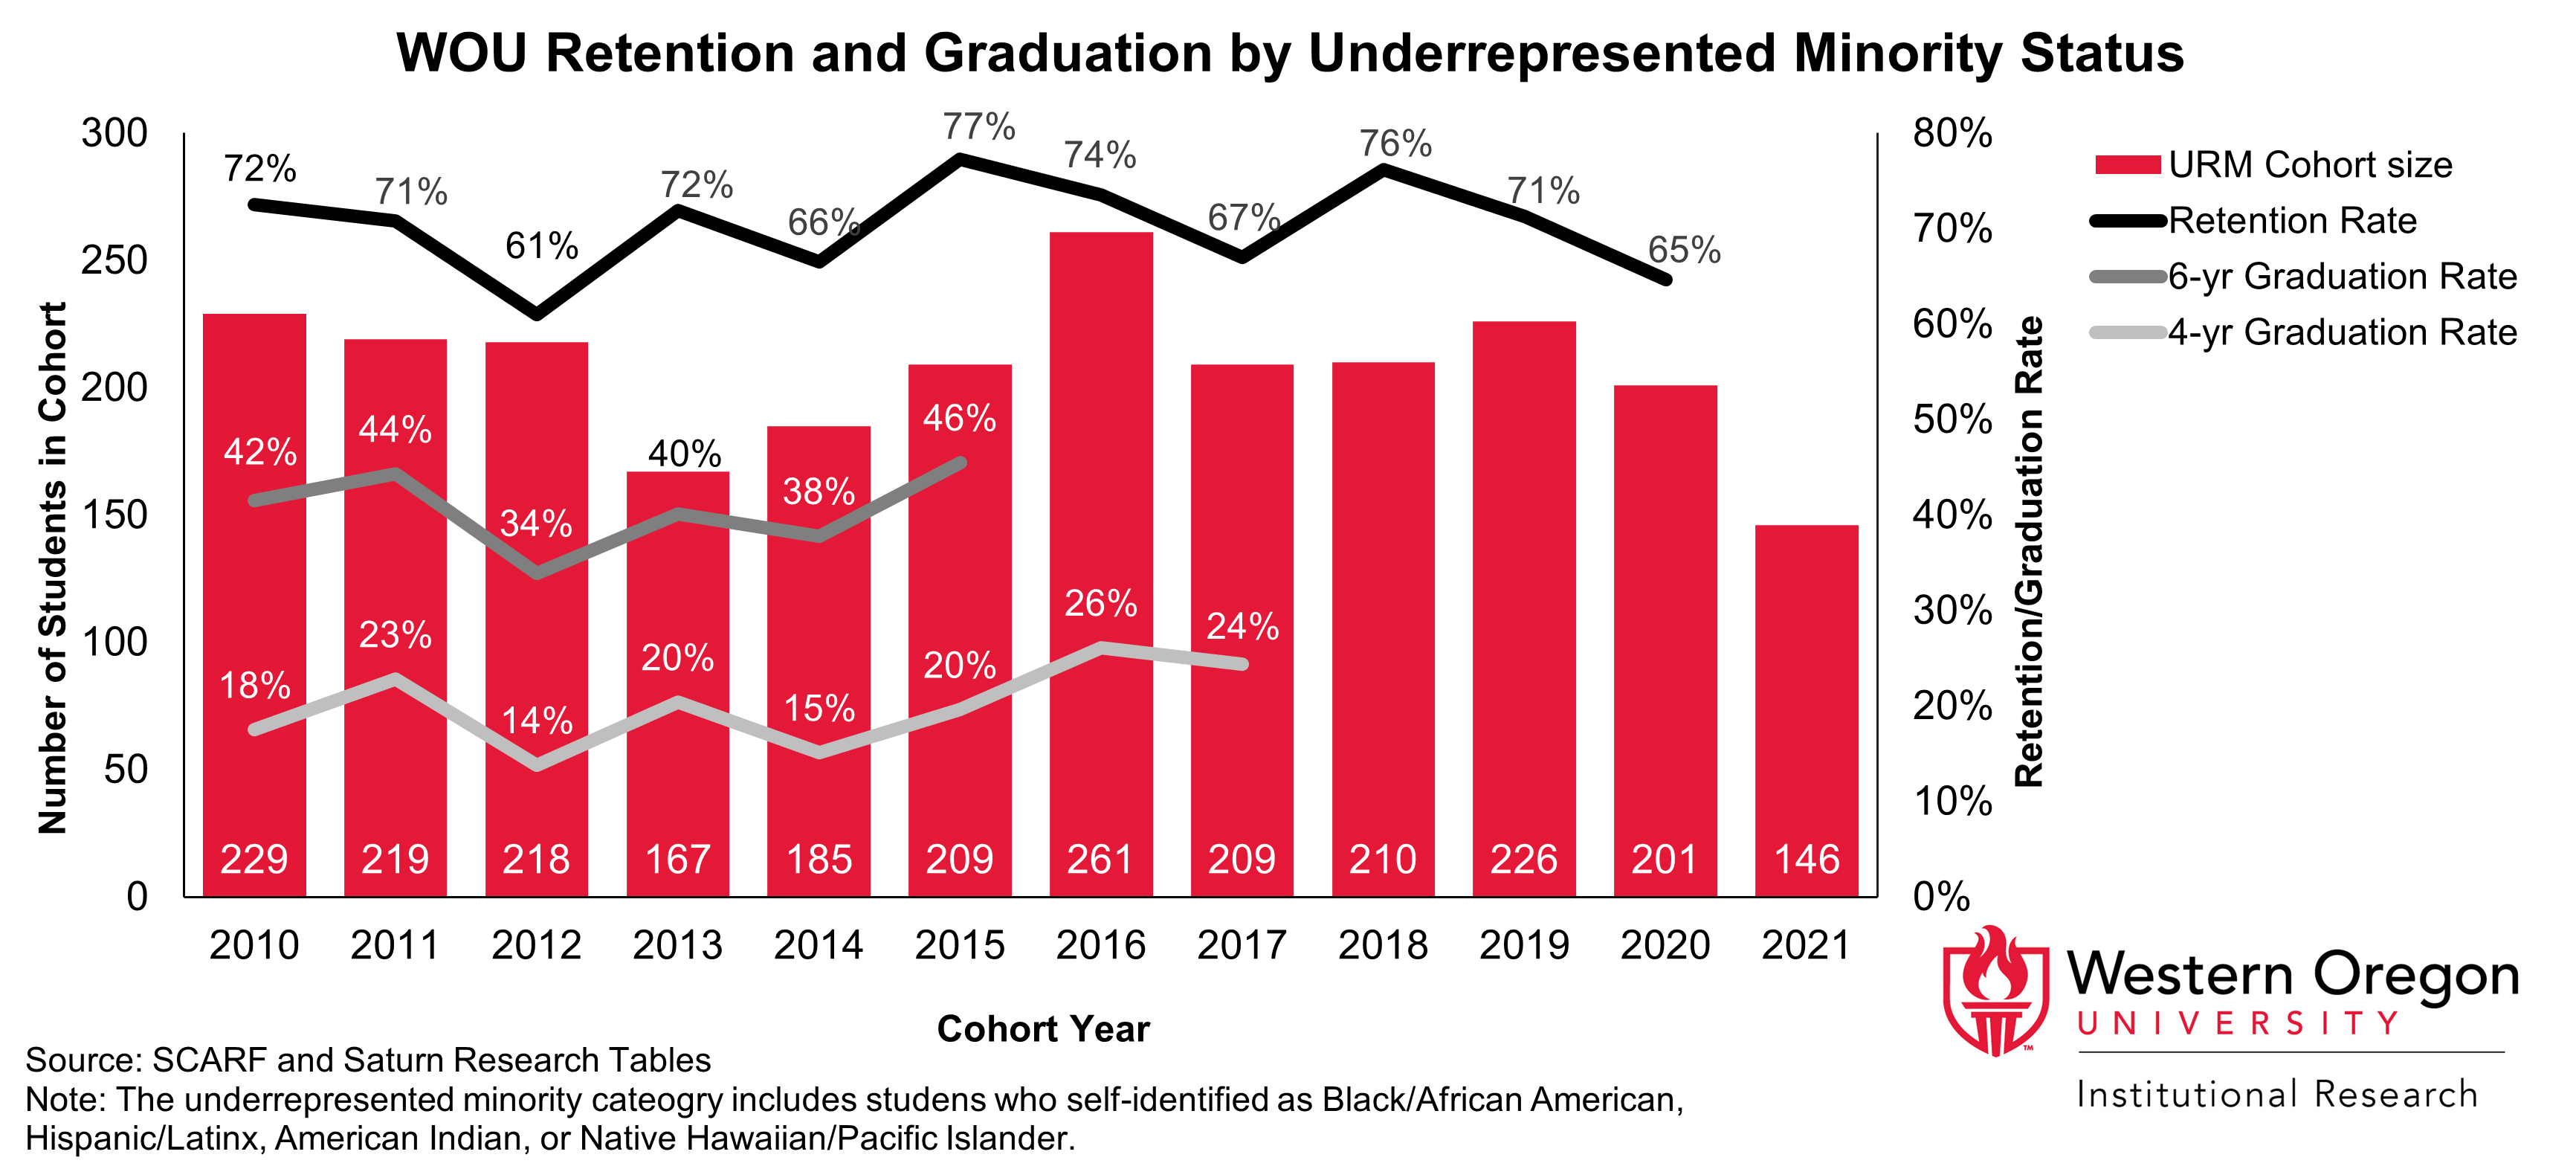 Bar and line graph of retention and 4- and 6-year graduation rates since 2010 for WOU students from underrepresented minority groups, showing that graduation rates have been steadily increasing while retention rates have remained largely stable